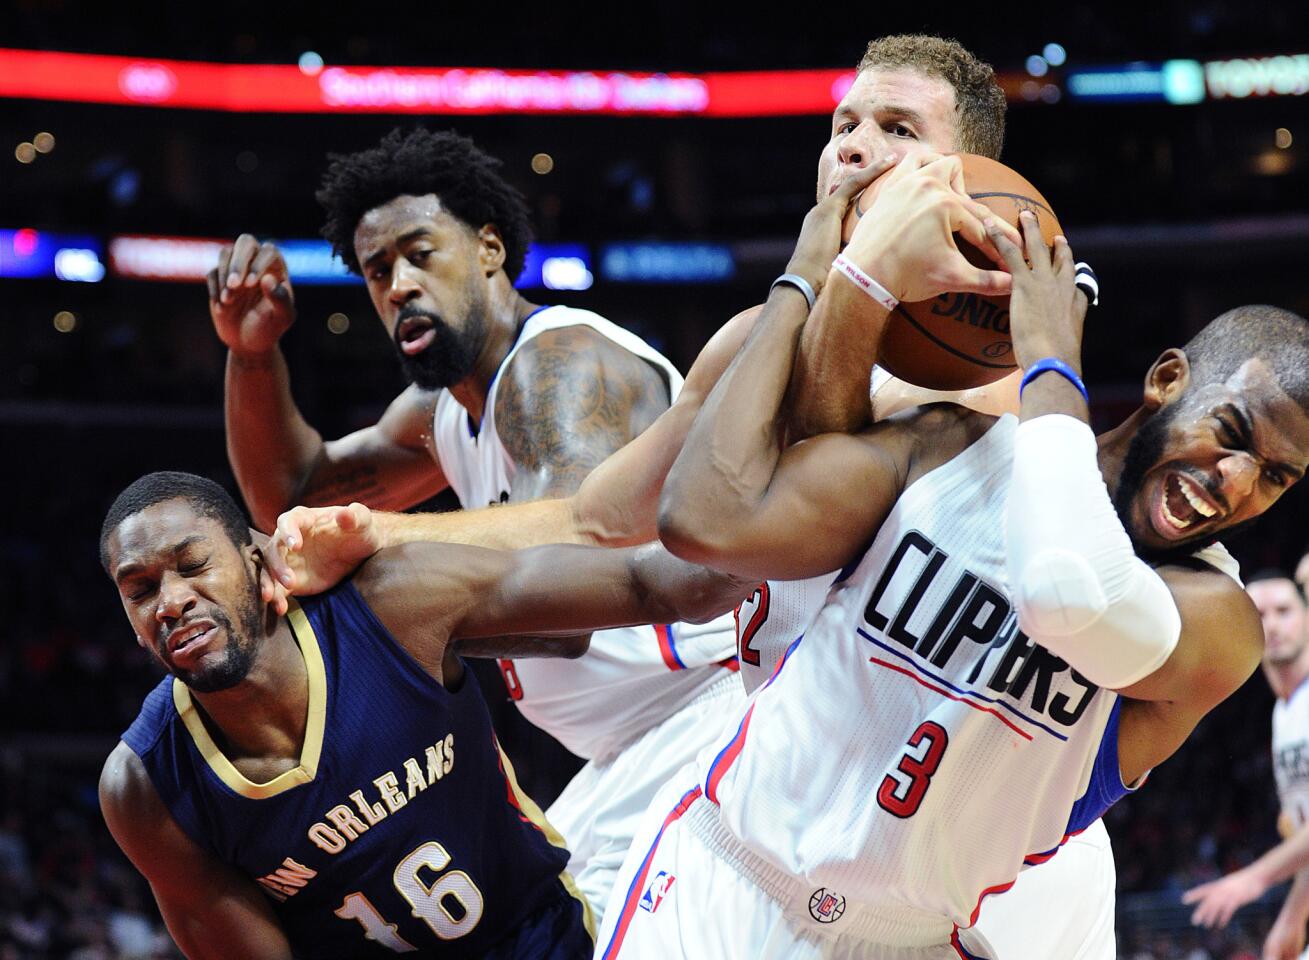 This Clippers win is big and easy thanks to some high-energy effort